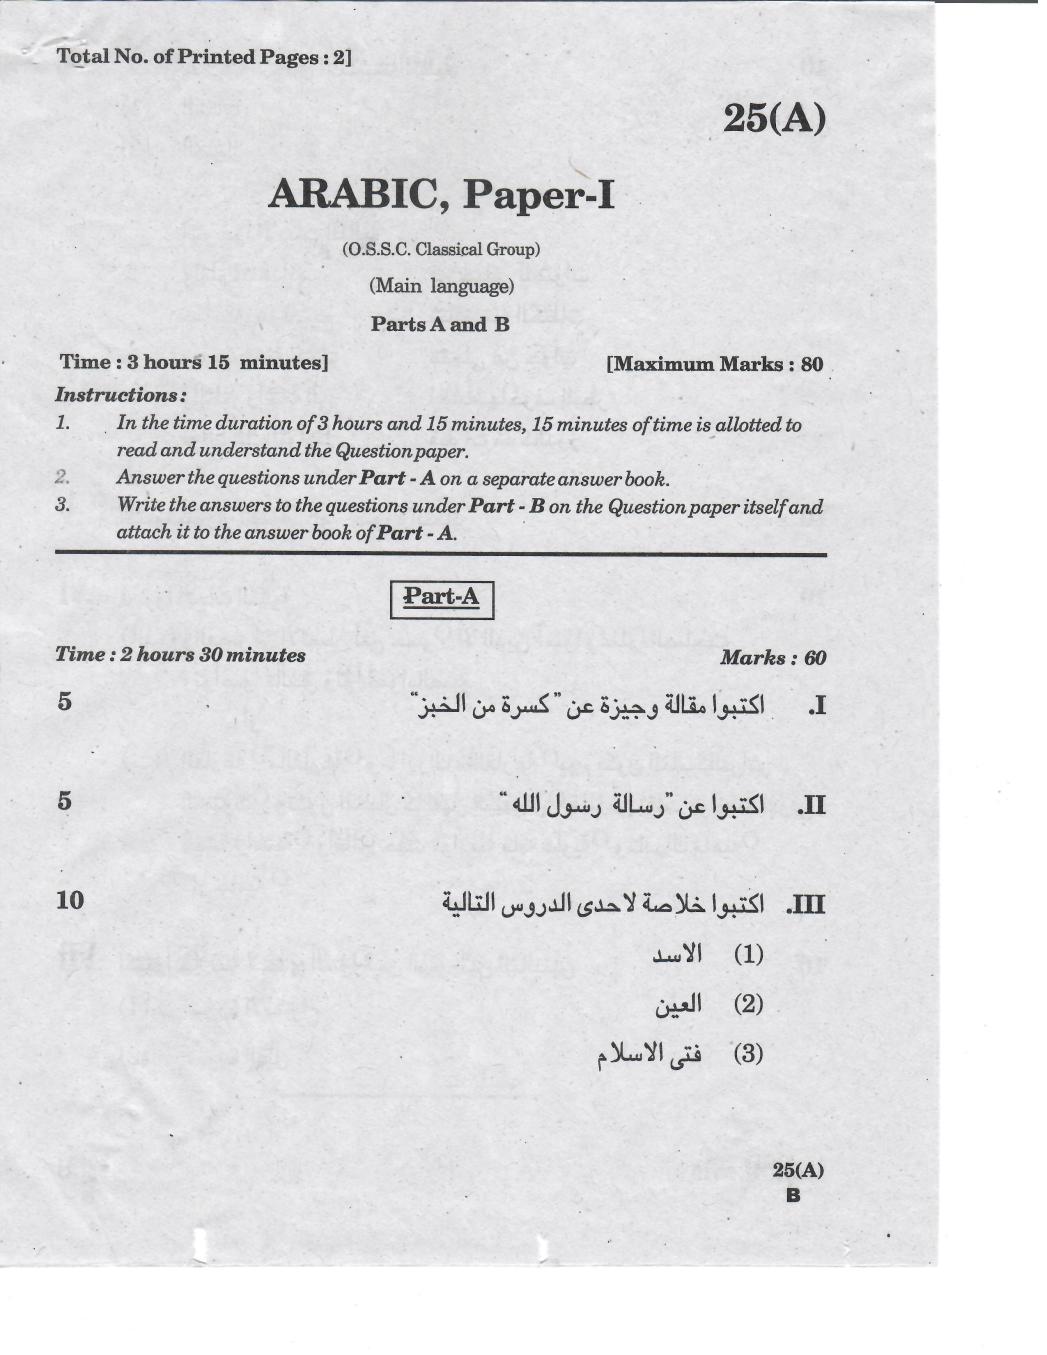 AP 10th Class Question Paper 2019 Arabic - Paper 1 (OSSC Classical Group) - Page 1